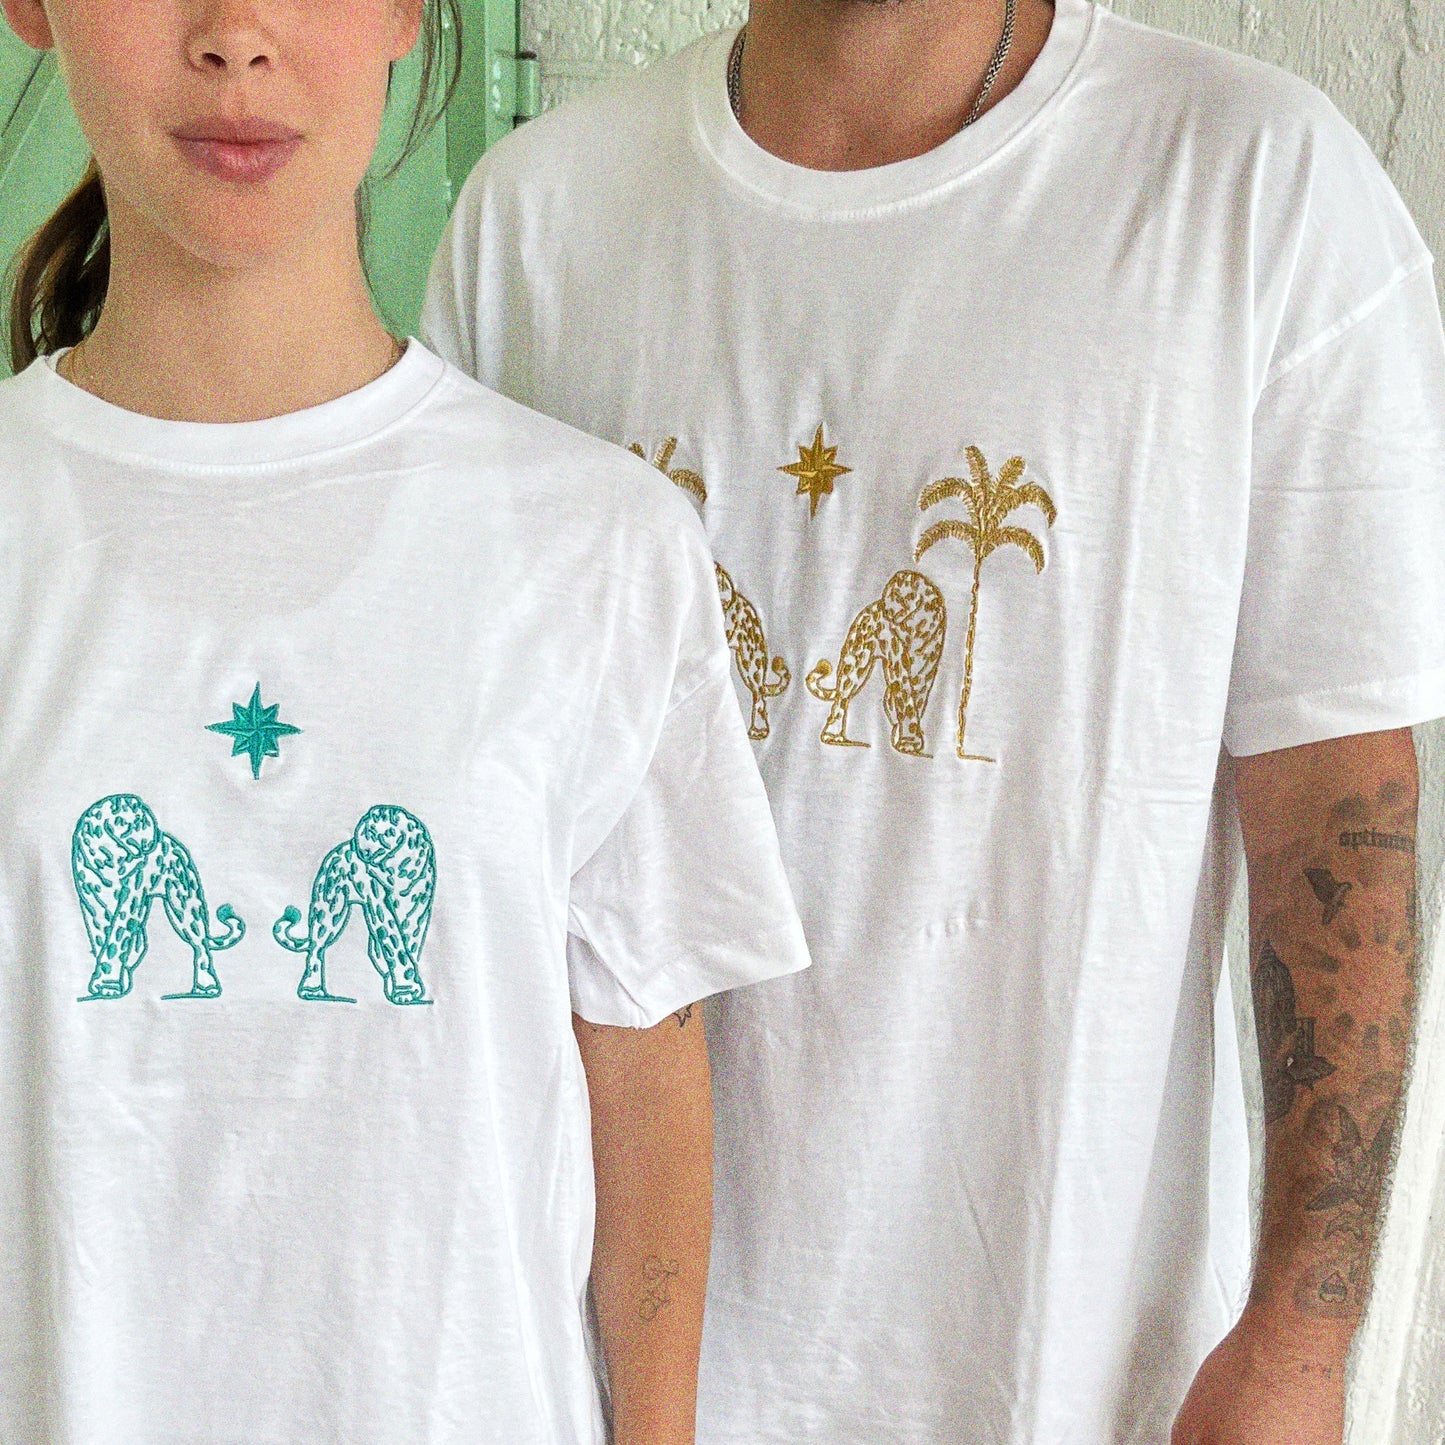 Turquoise embroidered T shirt